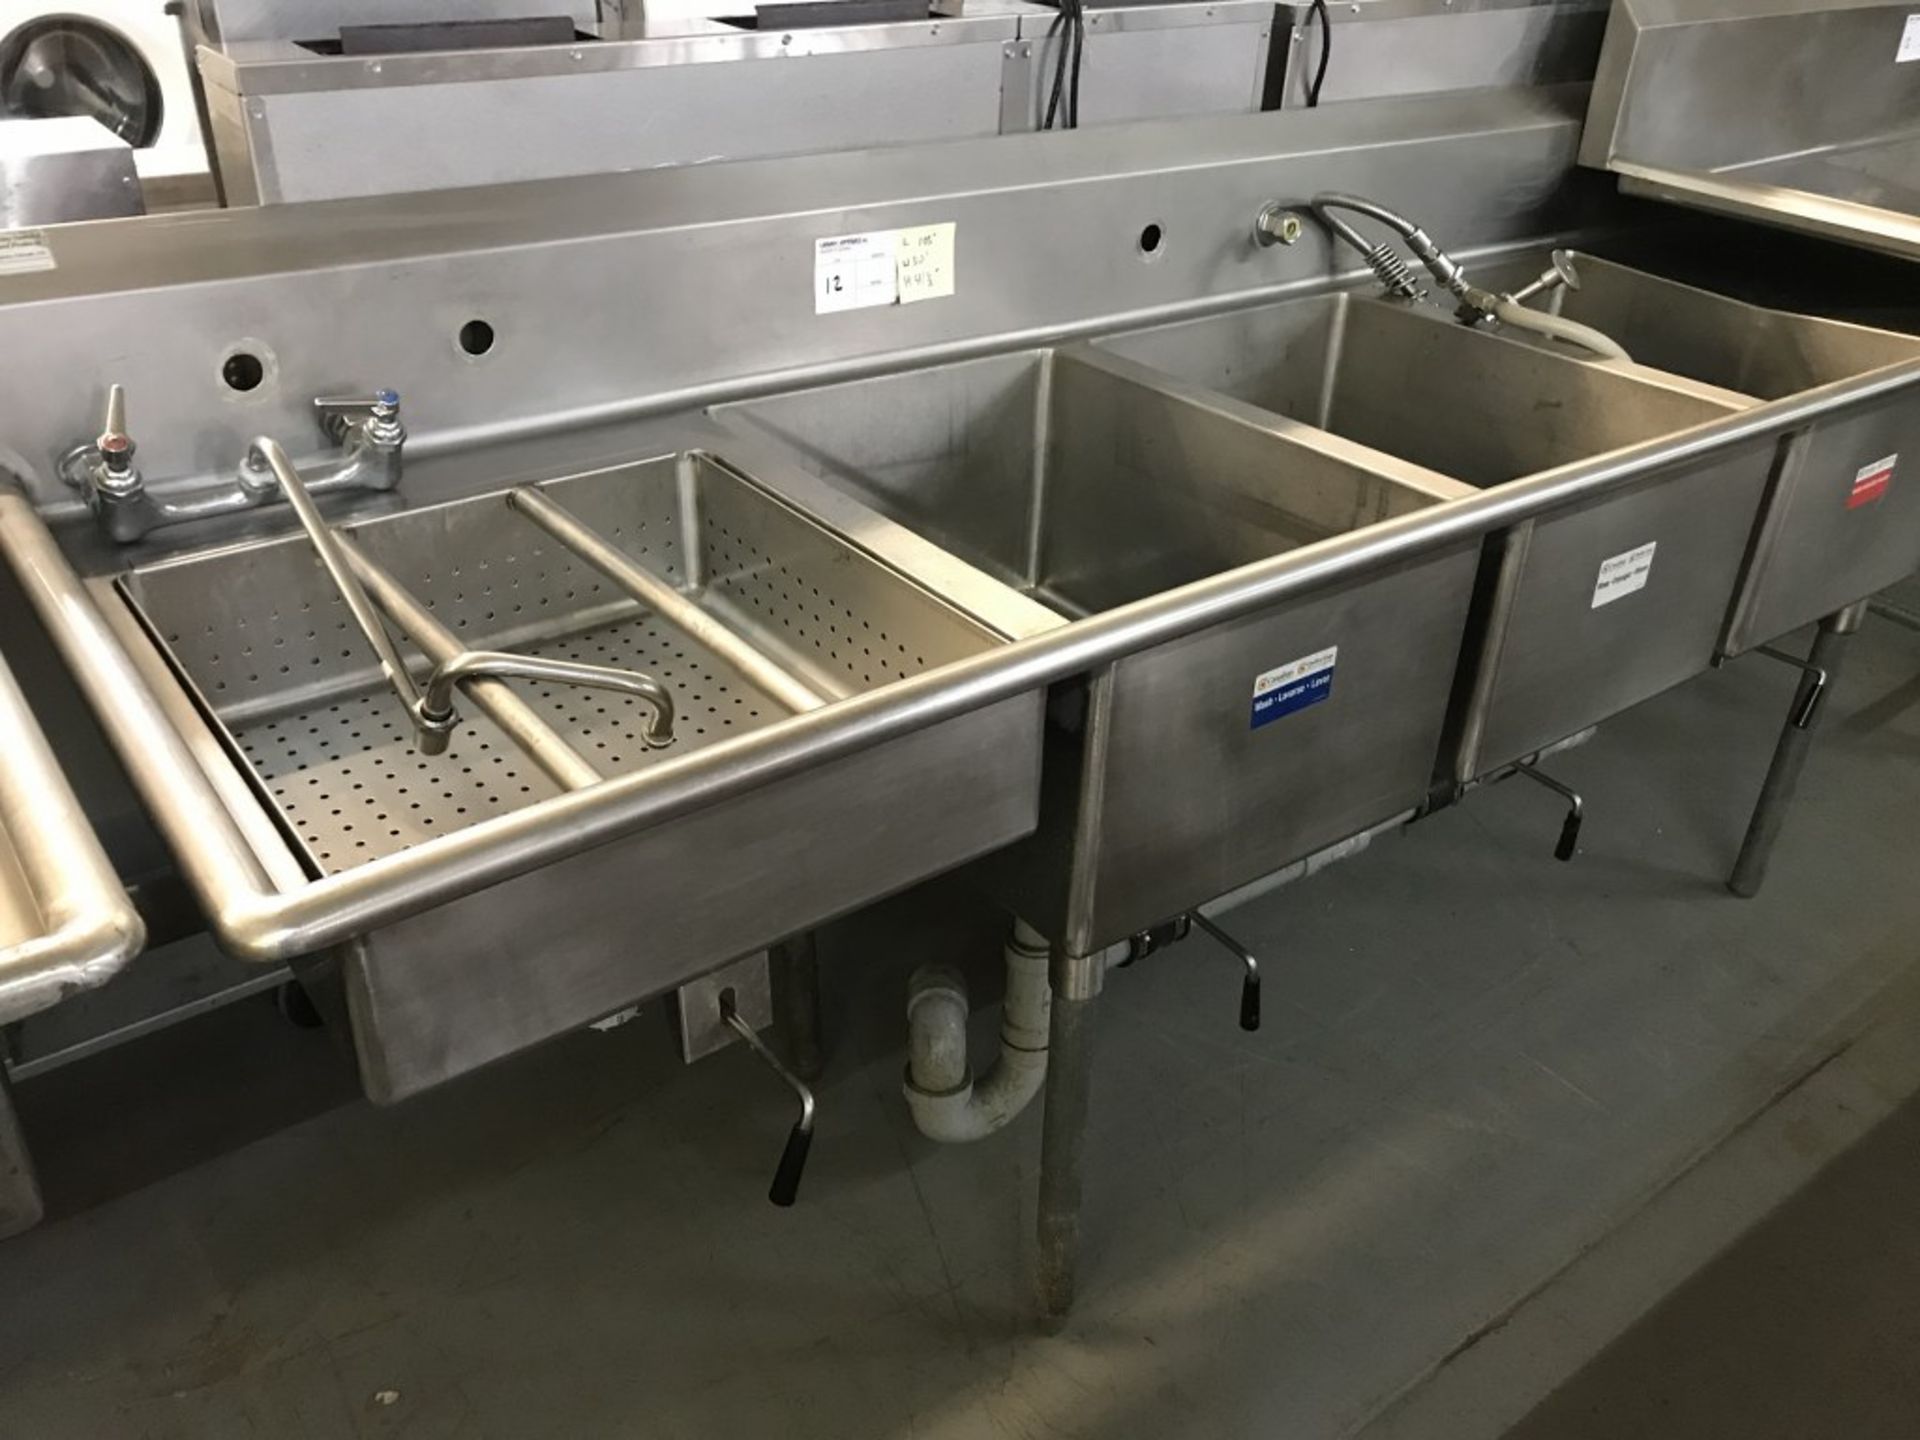 3 WELL - STAINLESS STEEL WASH SINK. 105"L X 30"W X 41.5"H